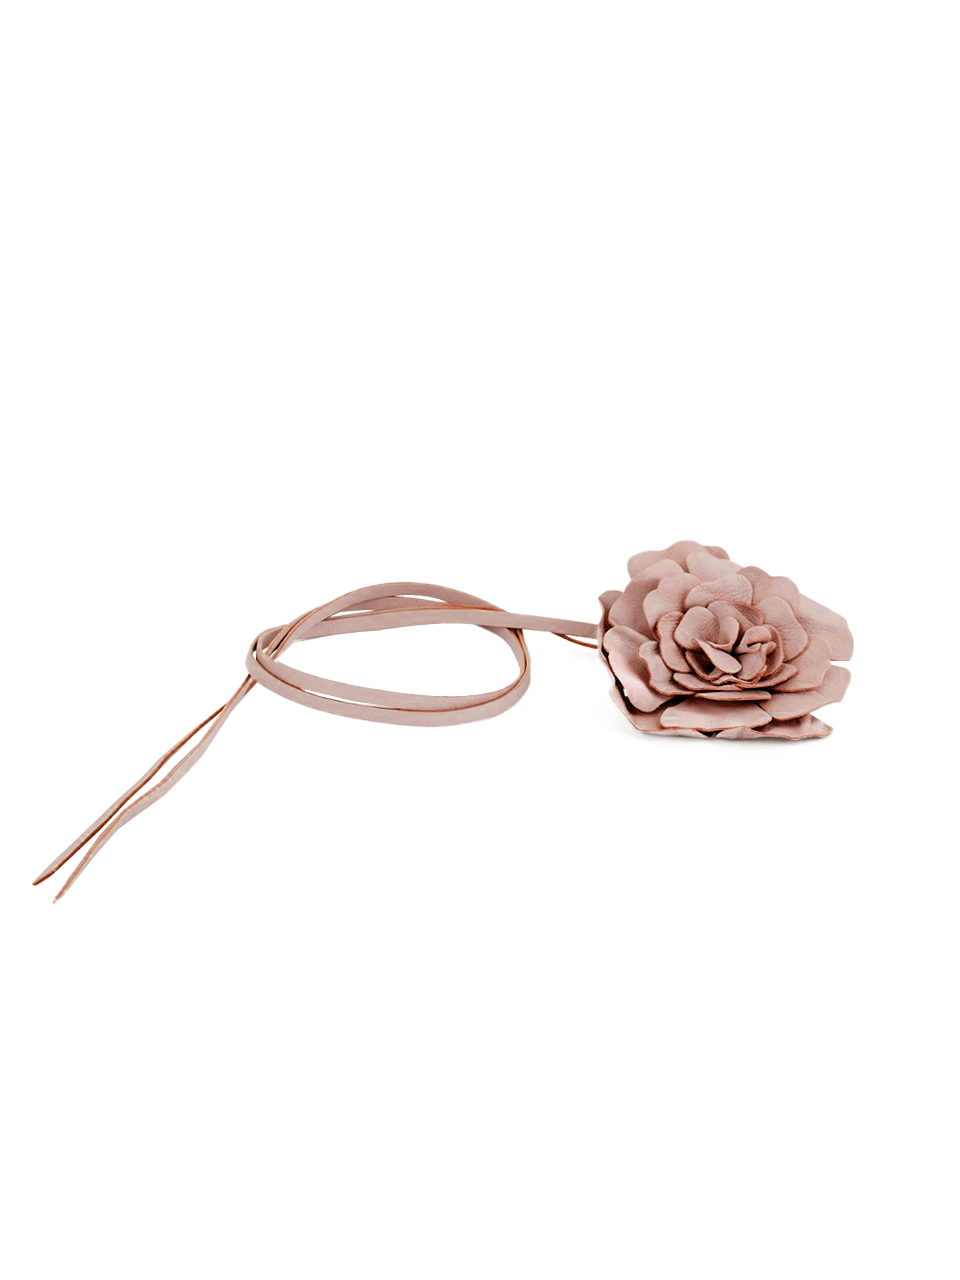 OTTOD'AME Leather Flower Belt in Pink Product Shot 